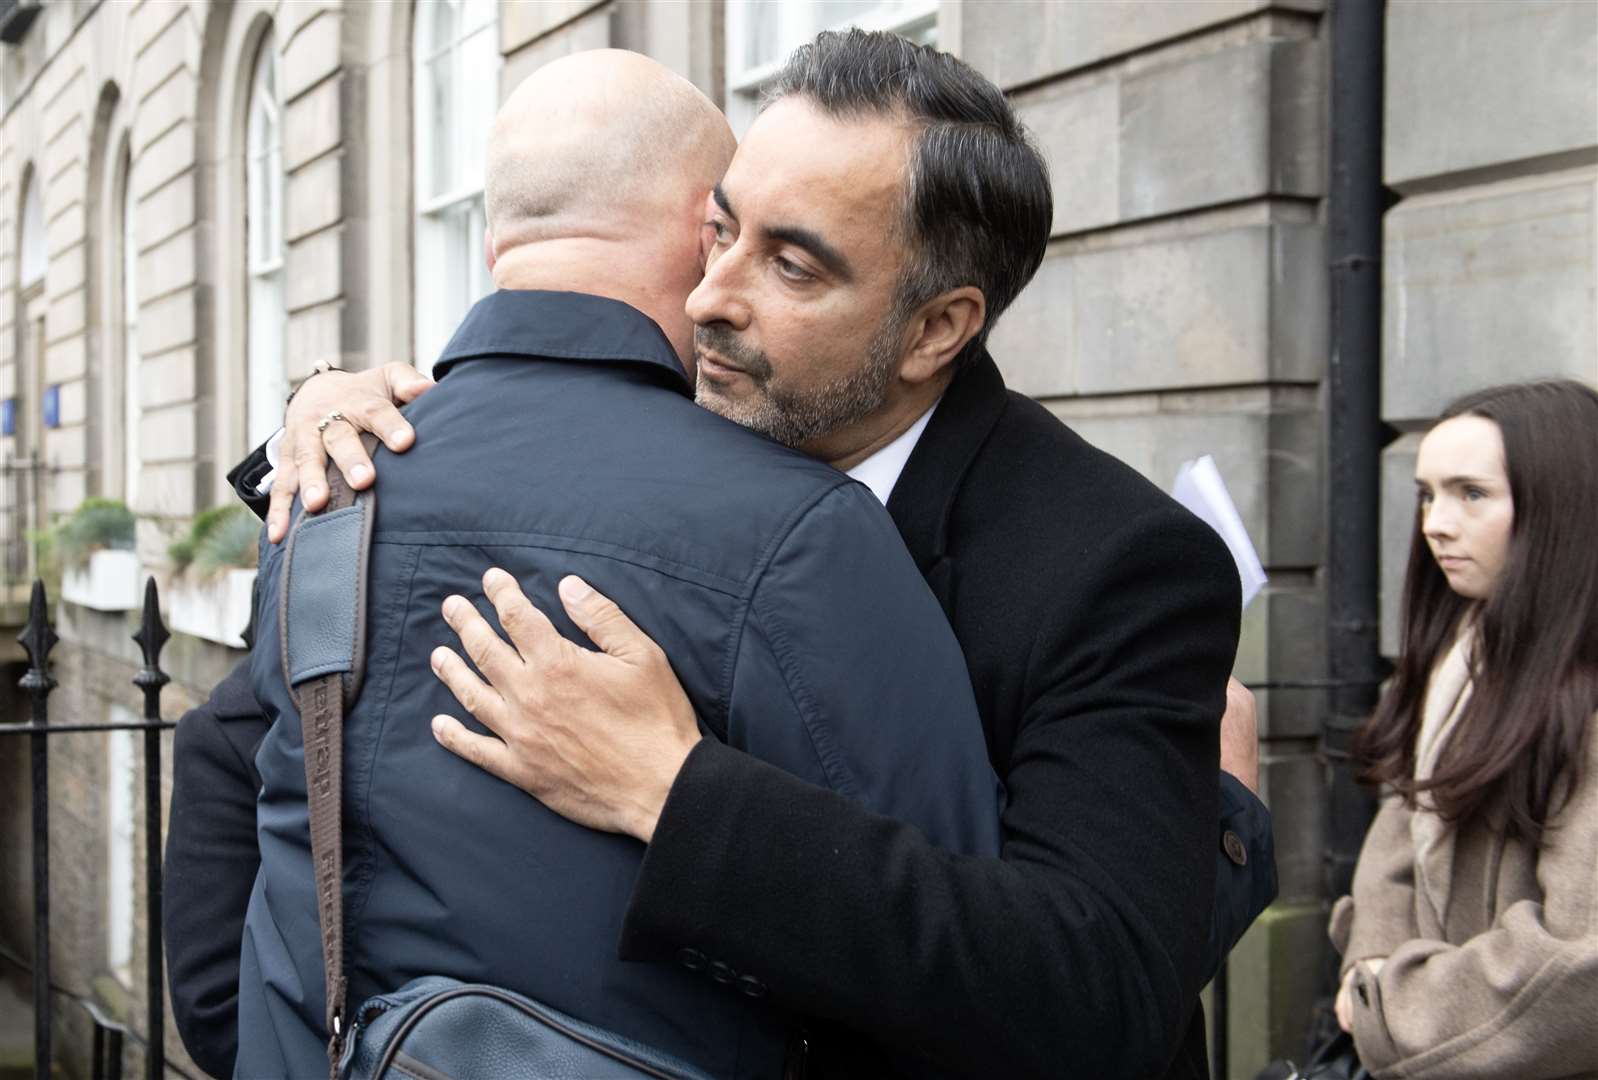 Alan Inglis (left) and Aamer Anwar embrace before a hearing at the Covid-19 pandemic inquiry at George House in Edinburgh (Lesley Martin/PA)